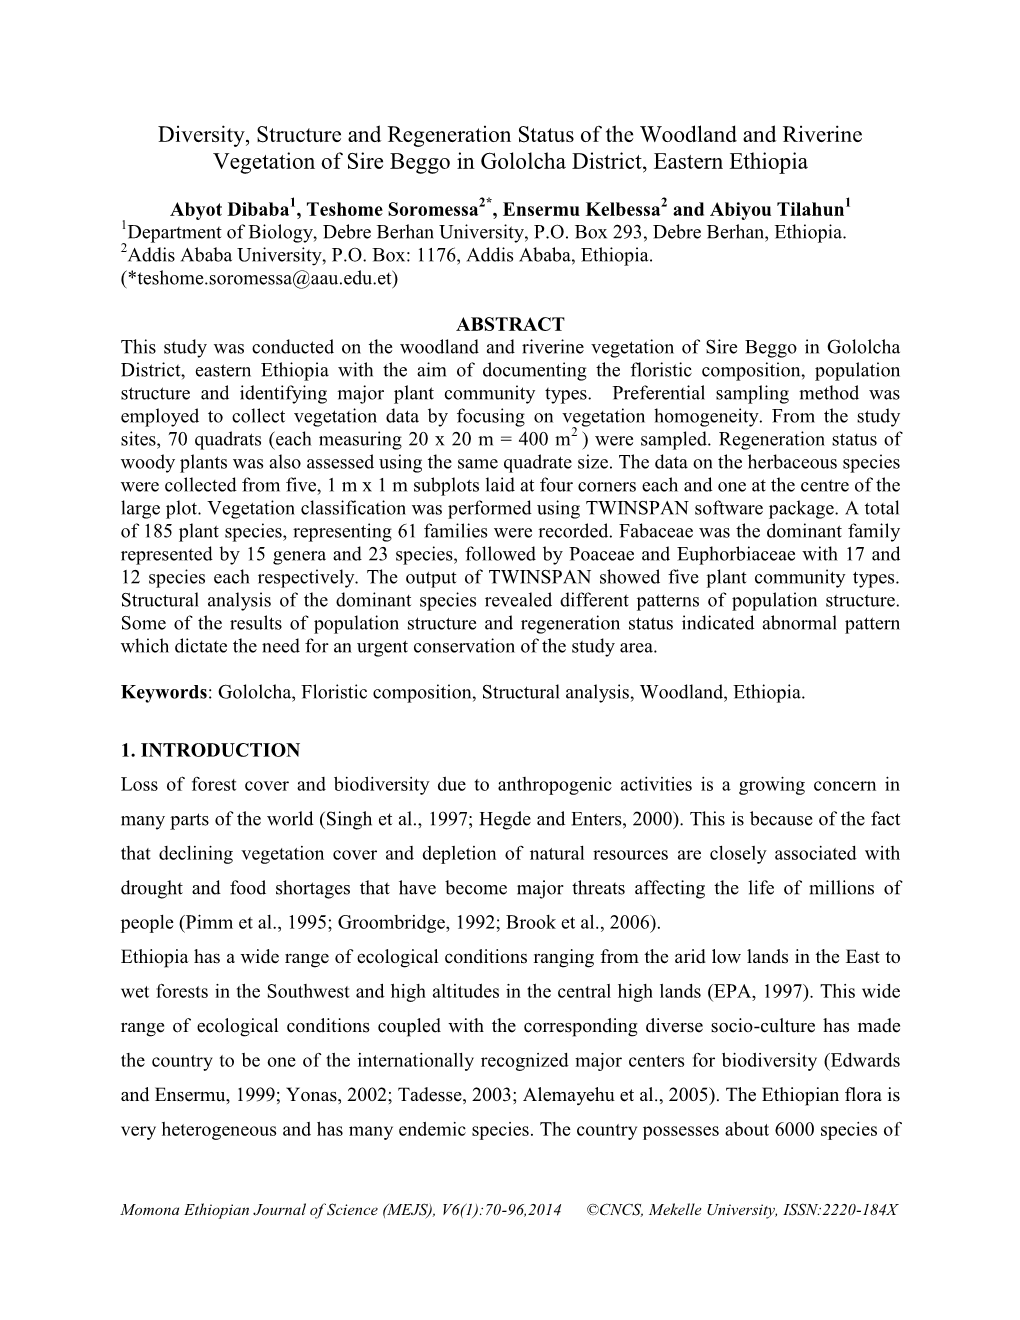 Diversity, Structure and Regeneration Status of the Woodland and Riverine Vegetation of Sire Beggo in Gololcha District, Eastern Ethiopia